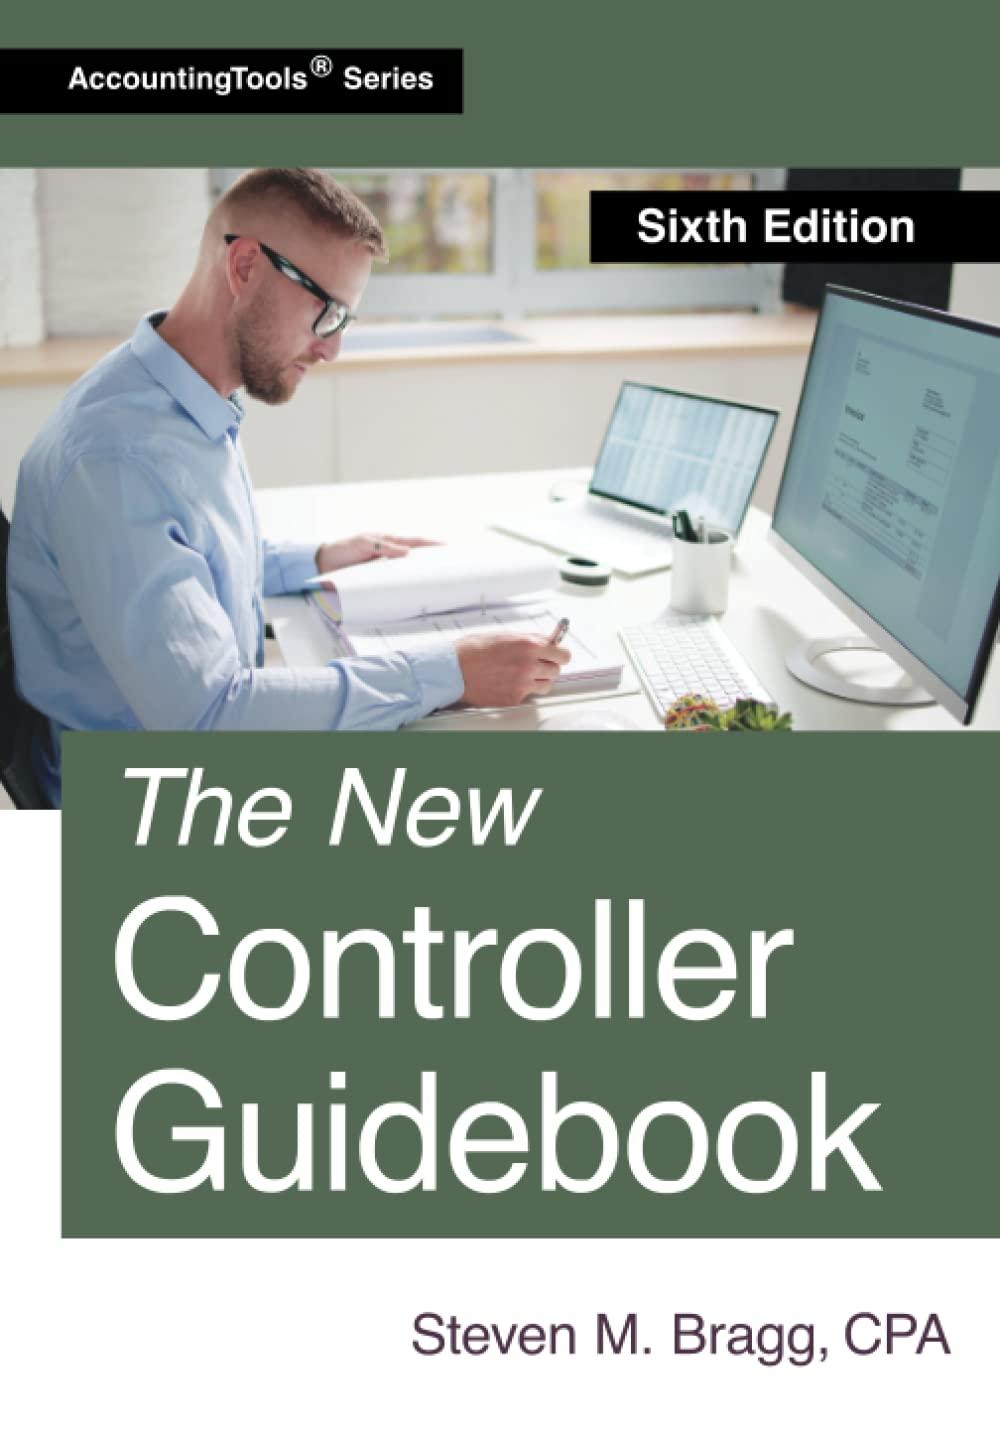 the new controller guidebook 6th edition steven m. bragg 1642211052, 978-1642211054